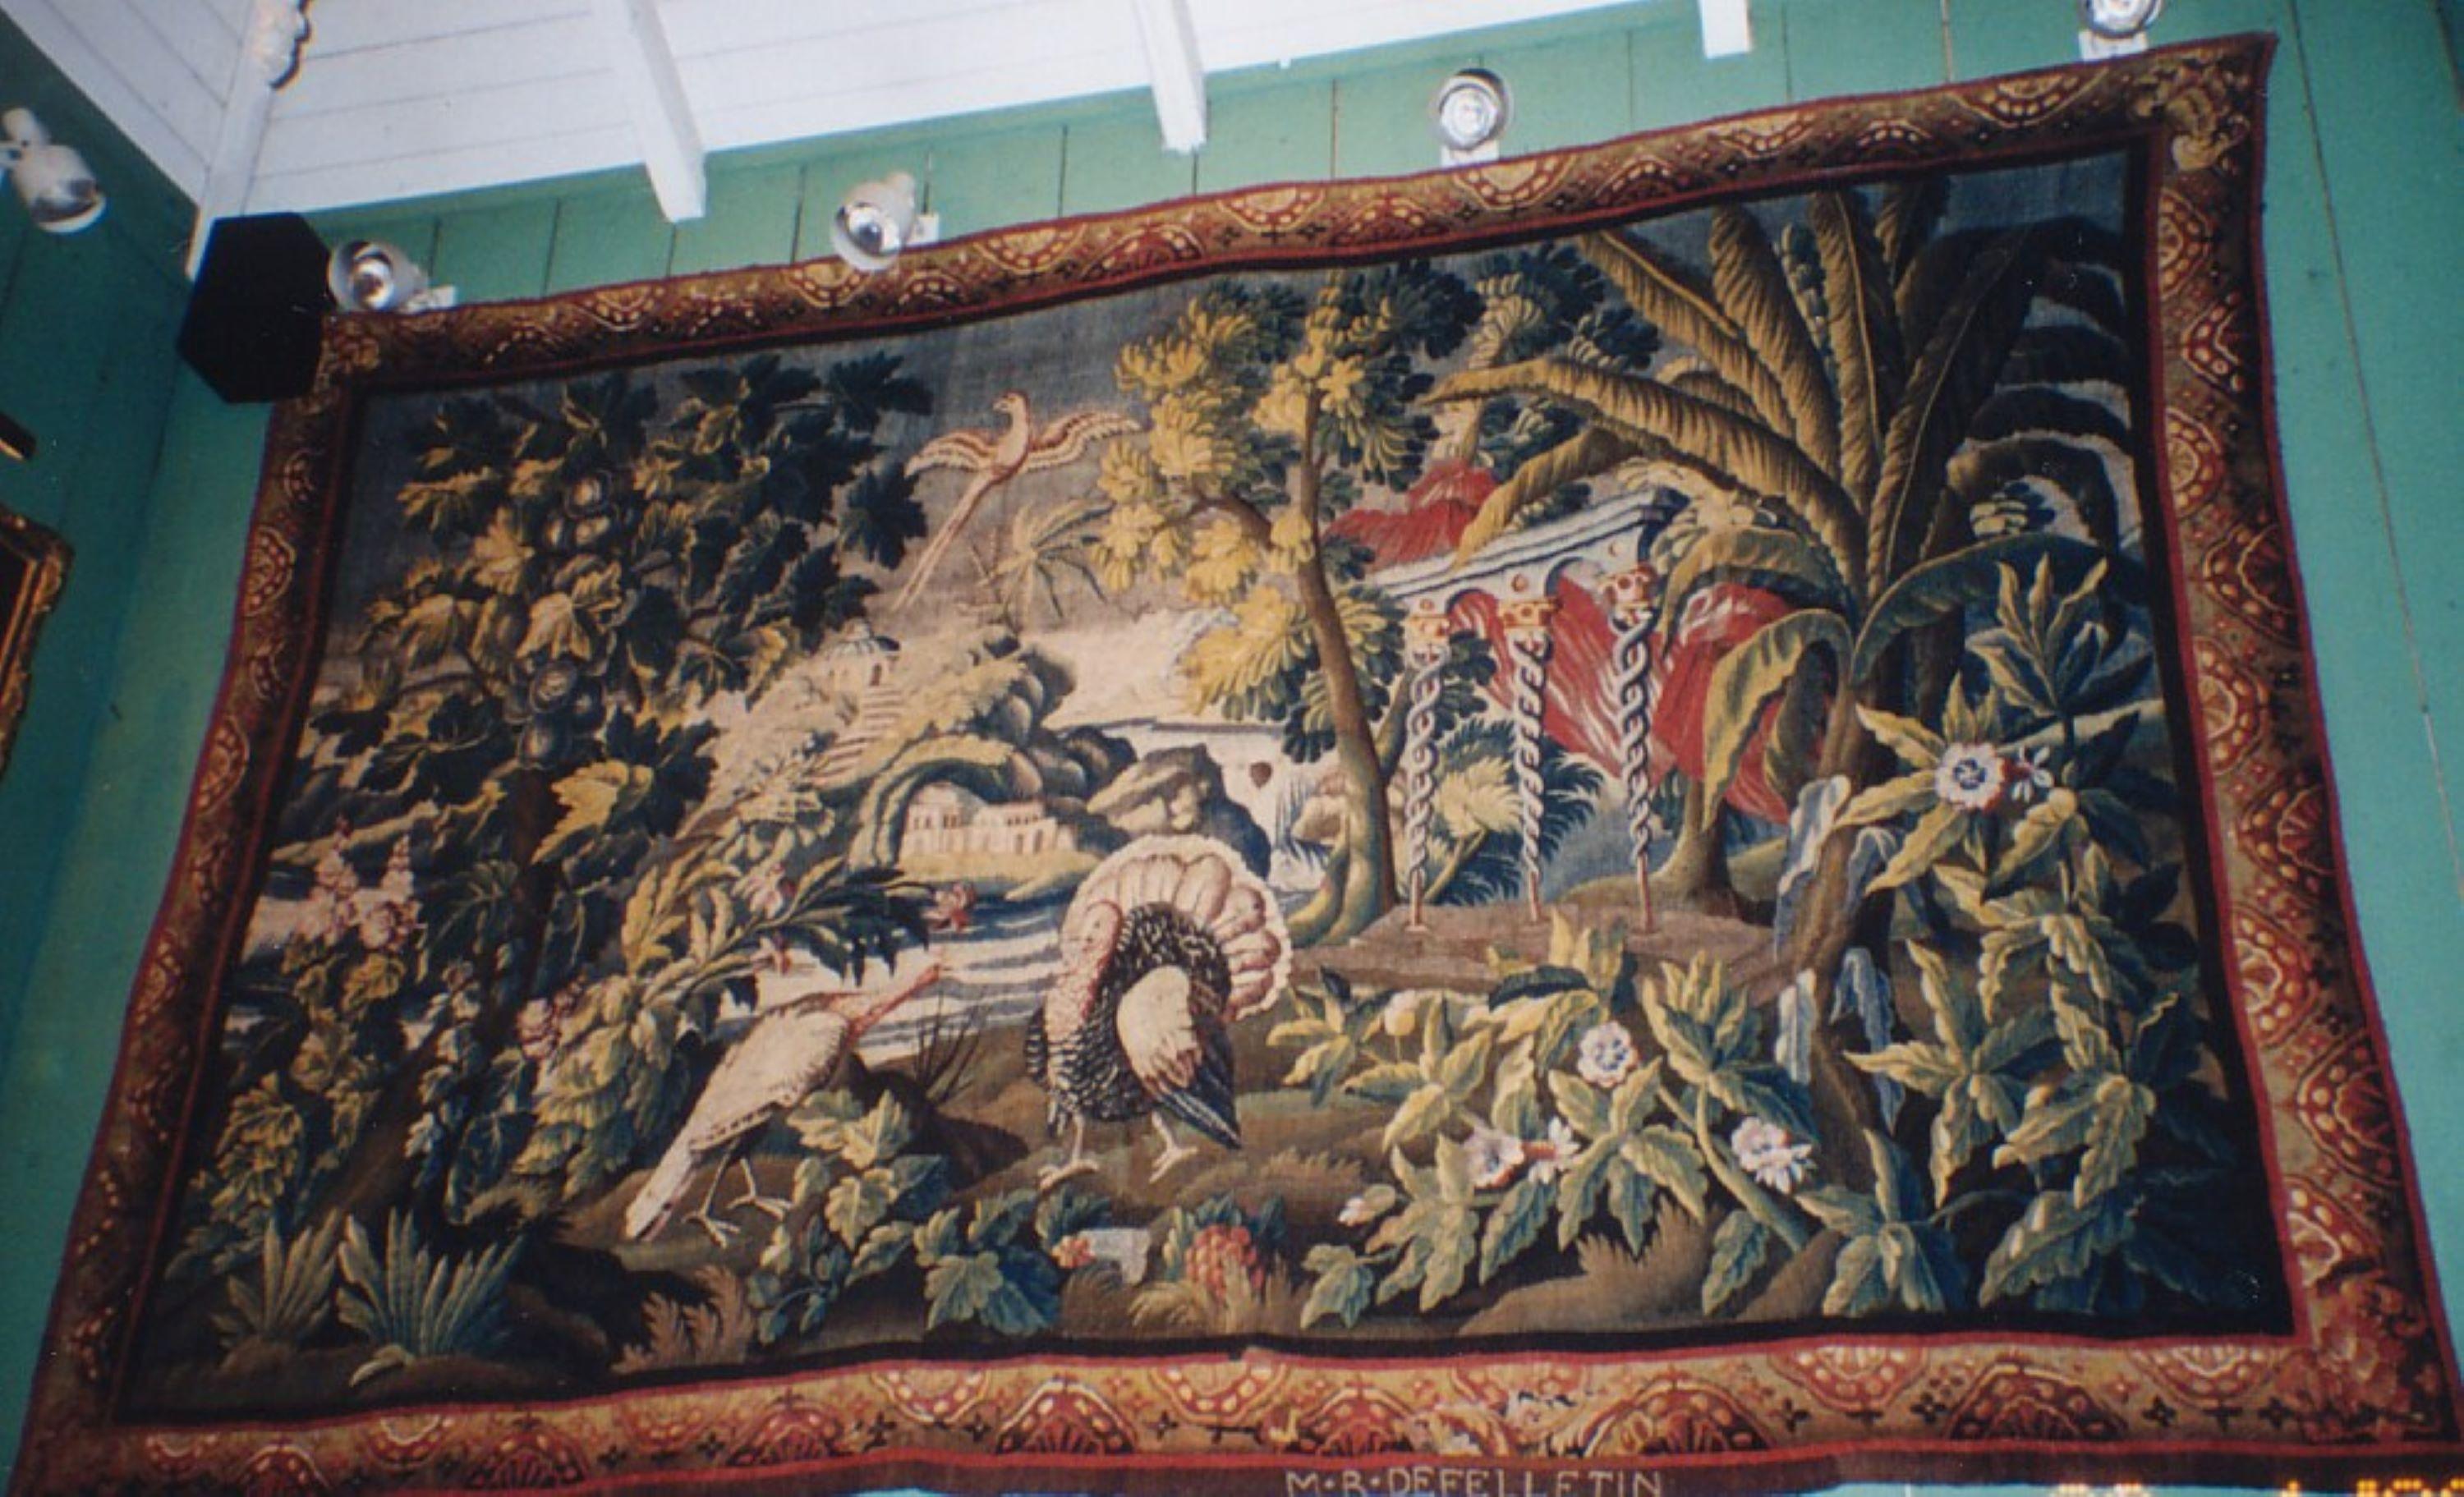 17th century tapestry of the AMERICAS manufactured: Royale De Felletin
“The Americas” In a beautiful landscape composed of water exotic trees plants villages castles and Turkey birds. Very rich borders exceptional colors of wools and silk, their